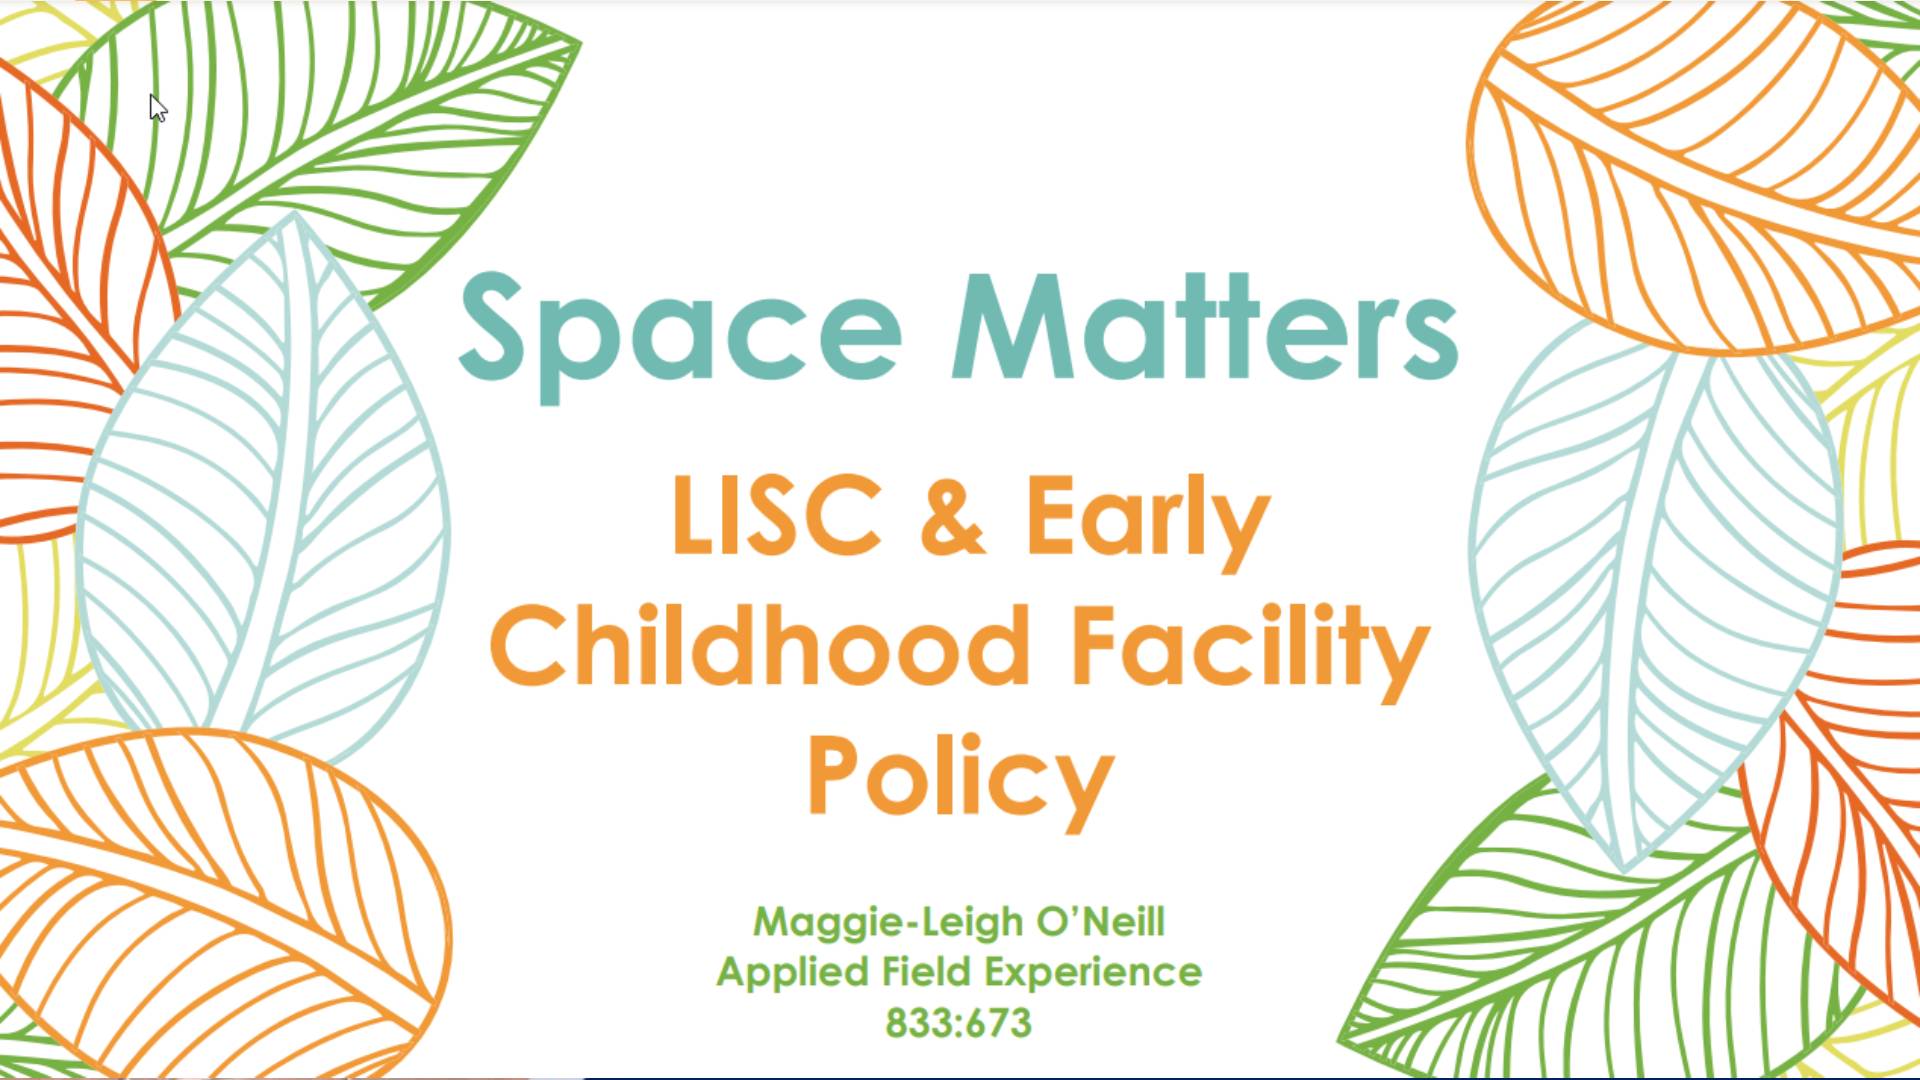 Space Matters: LISC & Early Childhood Facility Policy